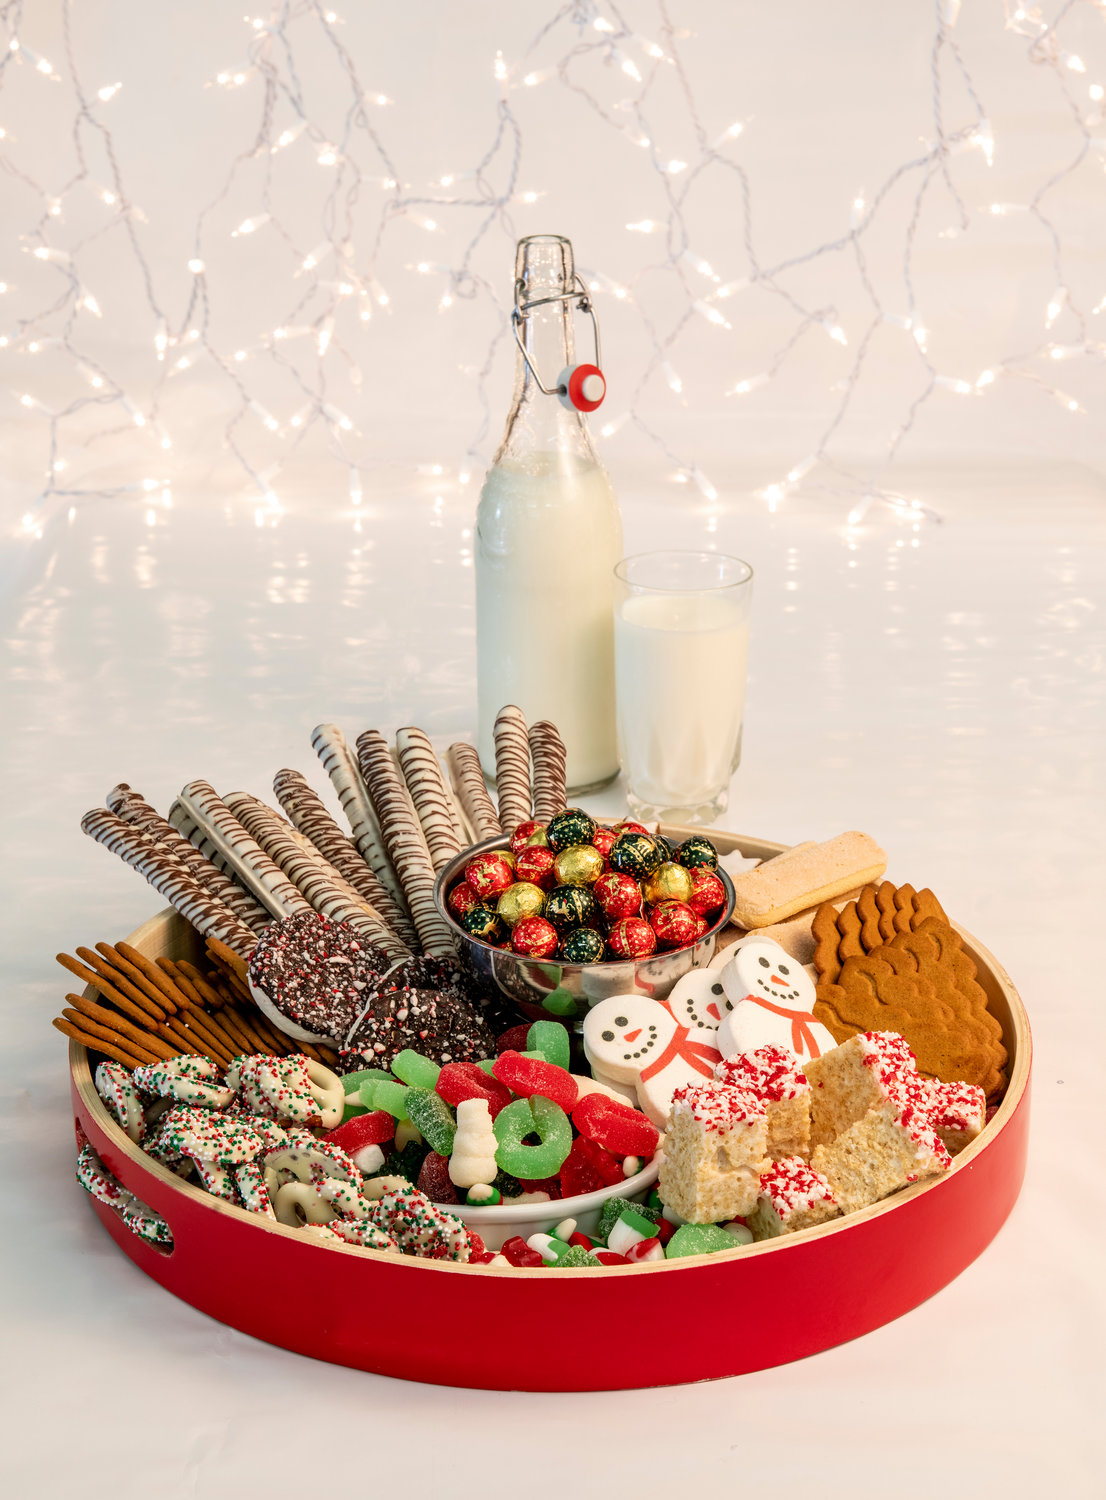 Because young palettes are not likely to go for cured meats and spicy cheeses, this Christmas-themed board served up peppermint sticks; Rice Krispie treats; marshmallow snowmen; ginger snaps; chocolate-swirled pretzel sticks; and ginger star cookies.